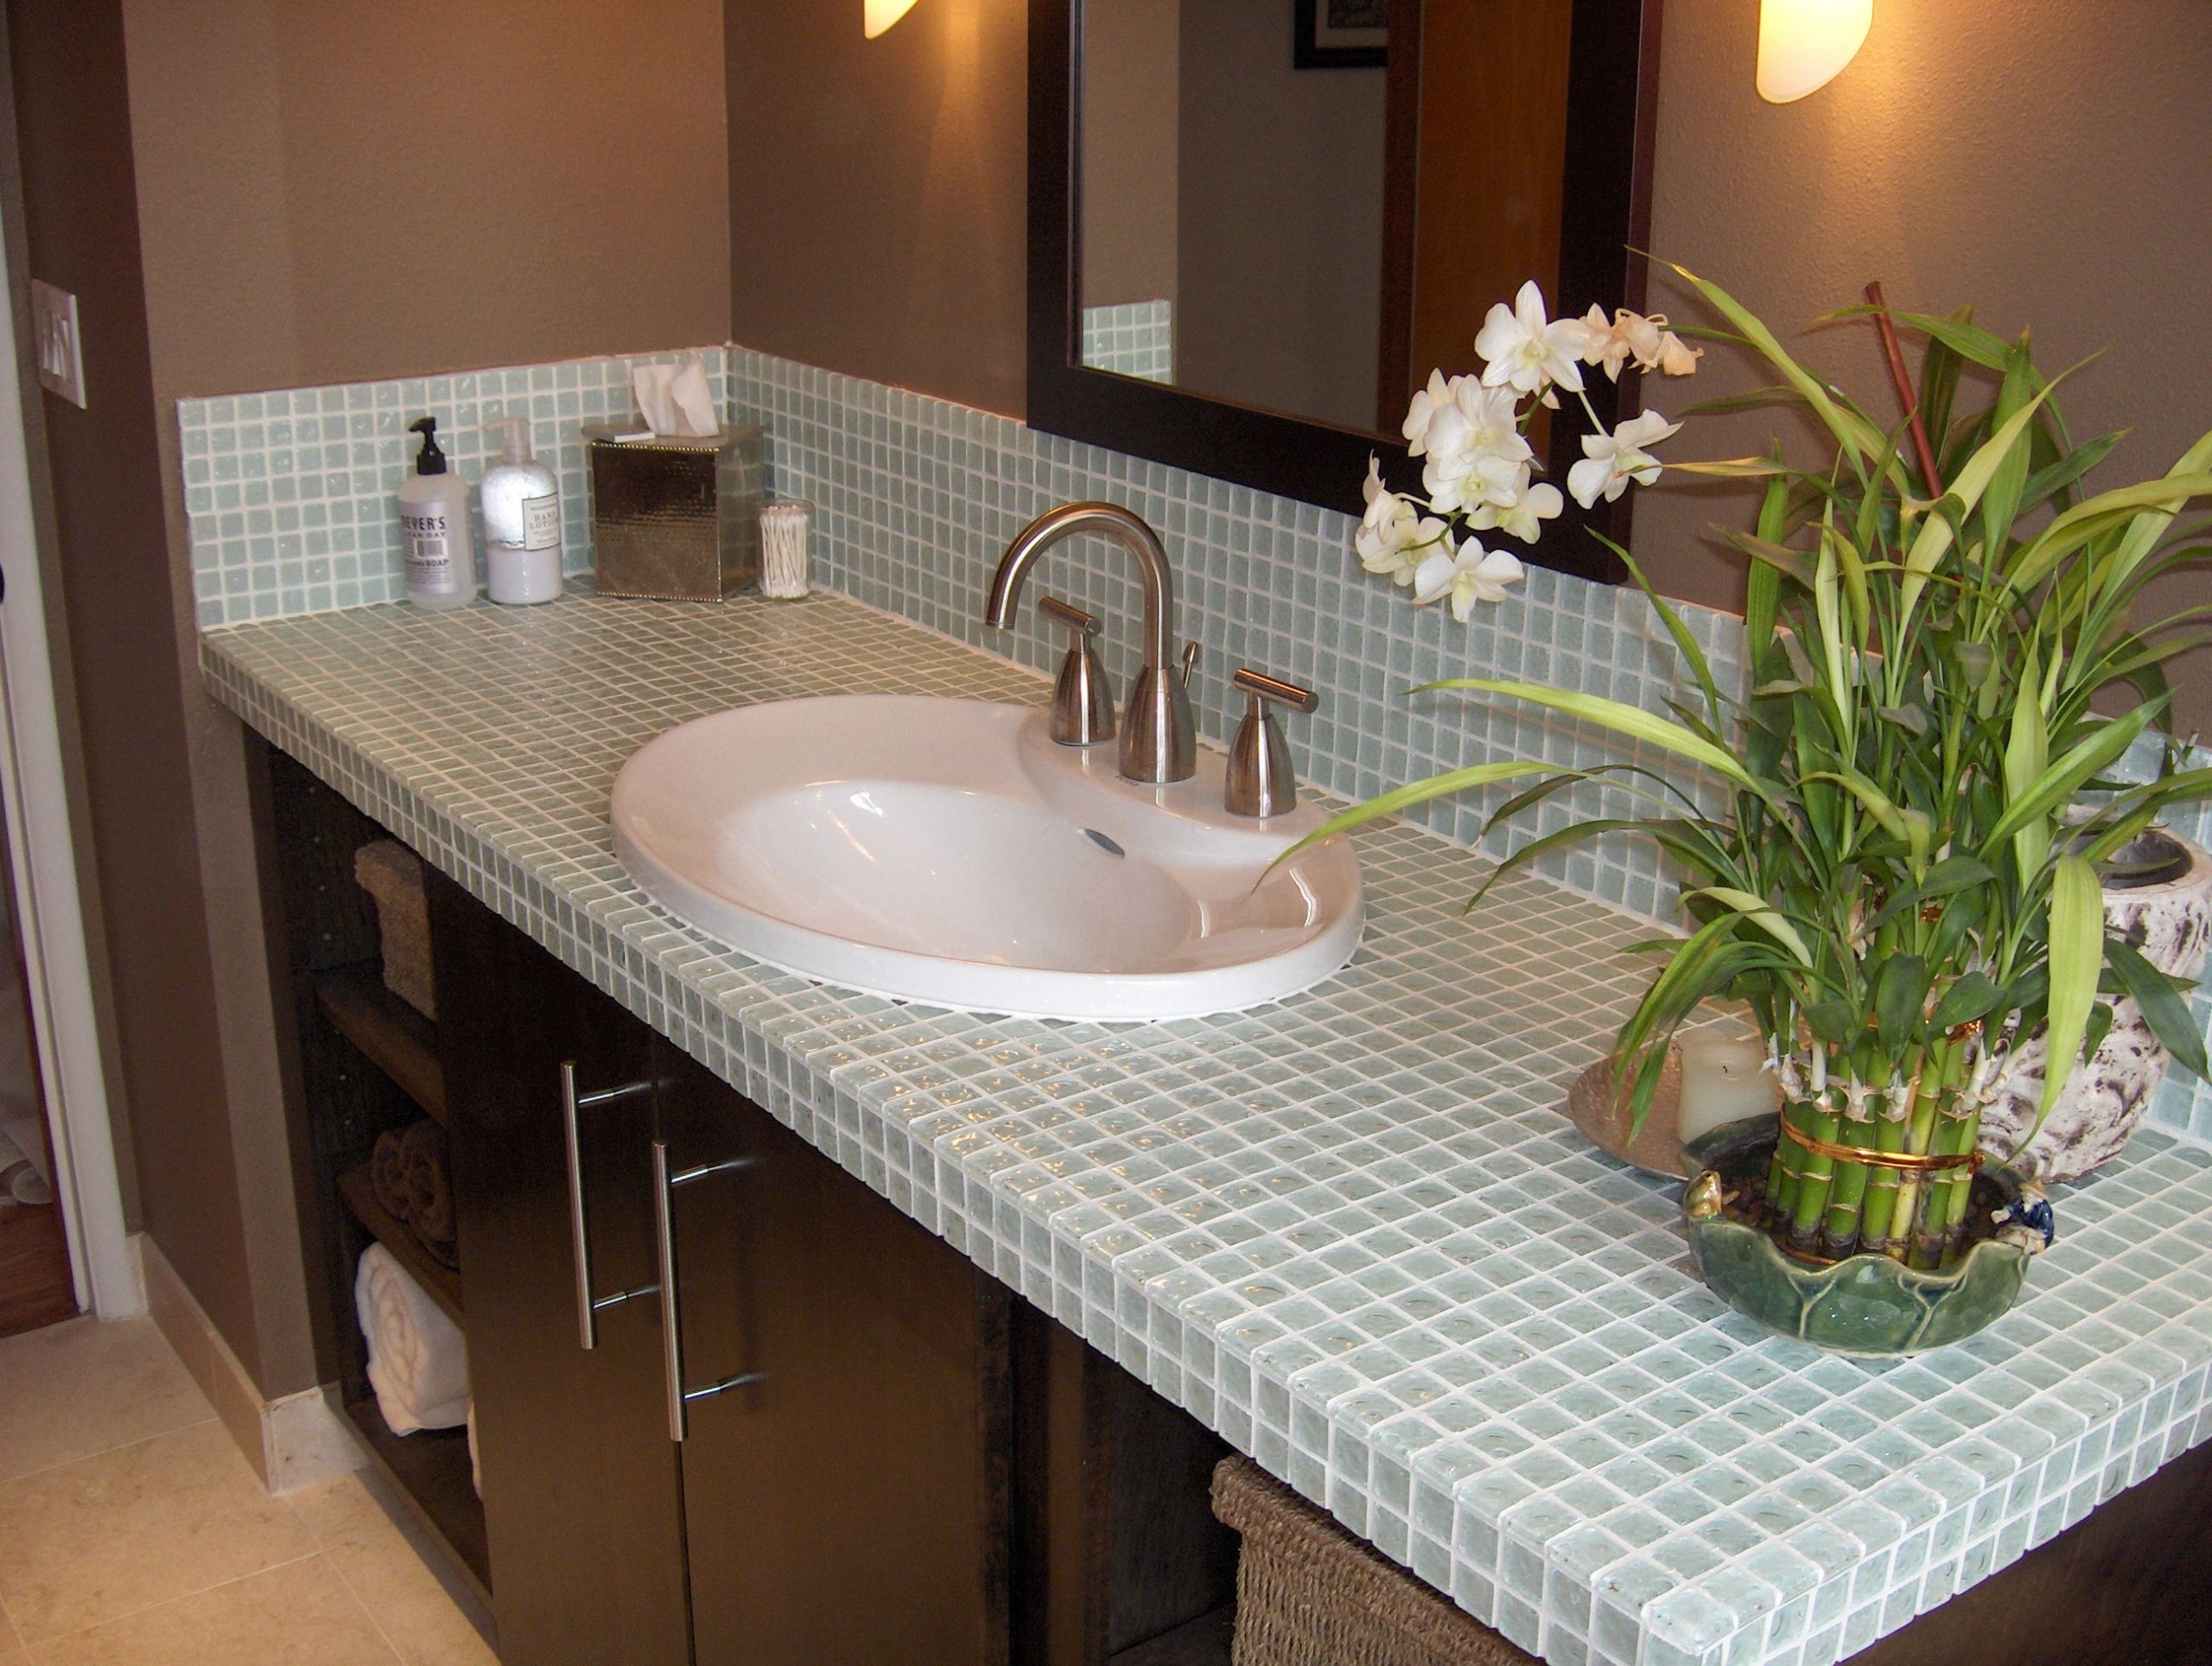 Bathroom Tile Countertops
 Take Your Bathroom to the Next Level With These 8